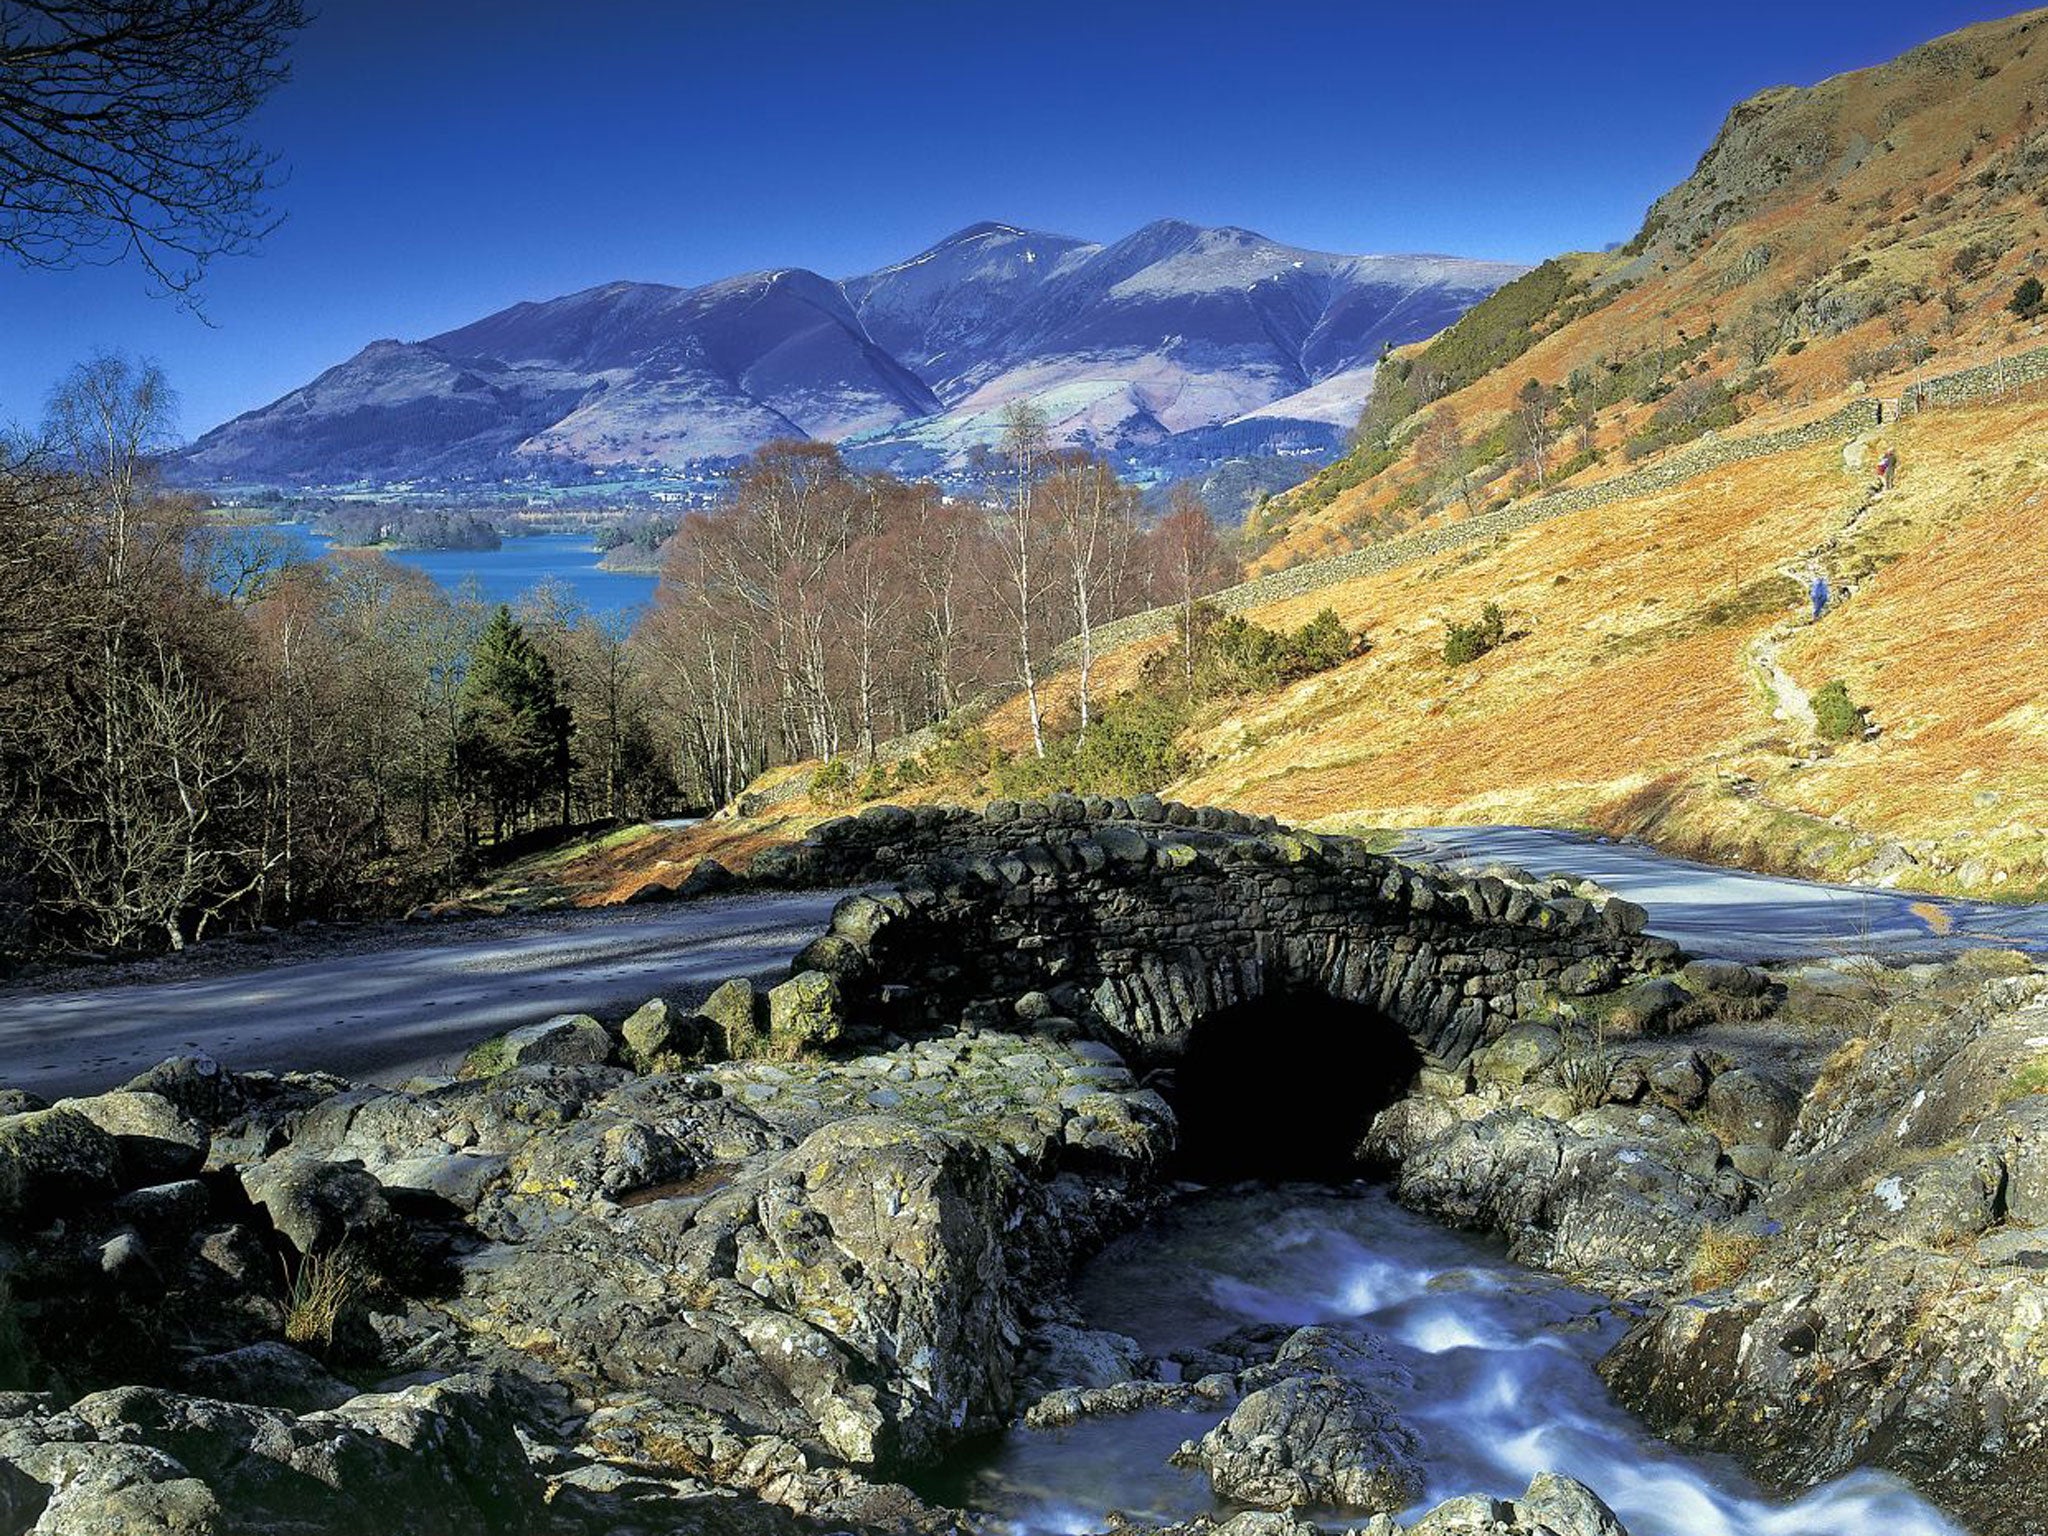 Looking over Ashness Bridge to Derwent Water and Skiddaw in the threatened Western Lake District